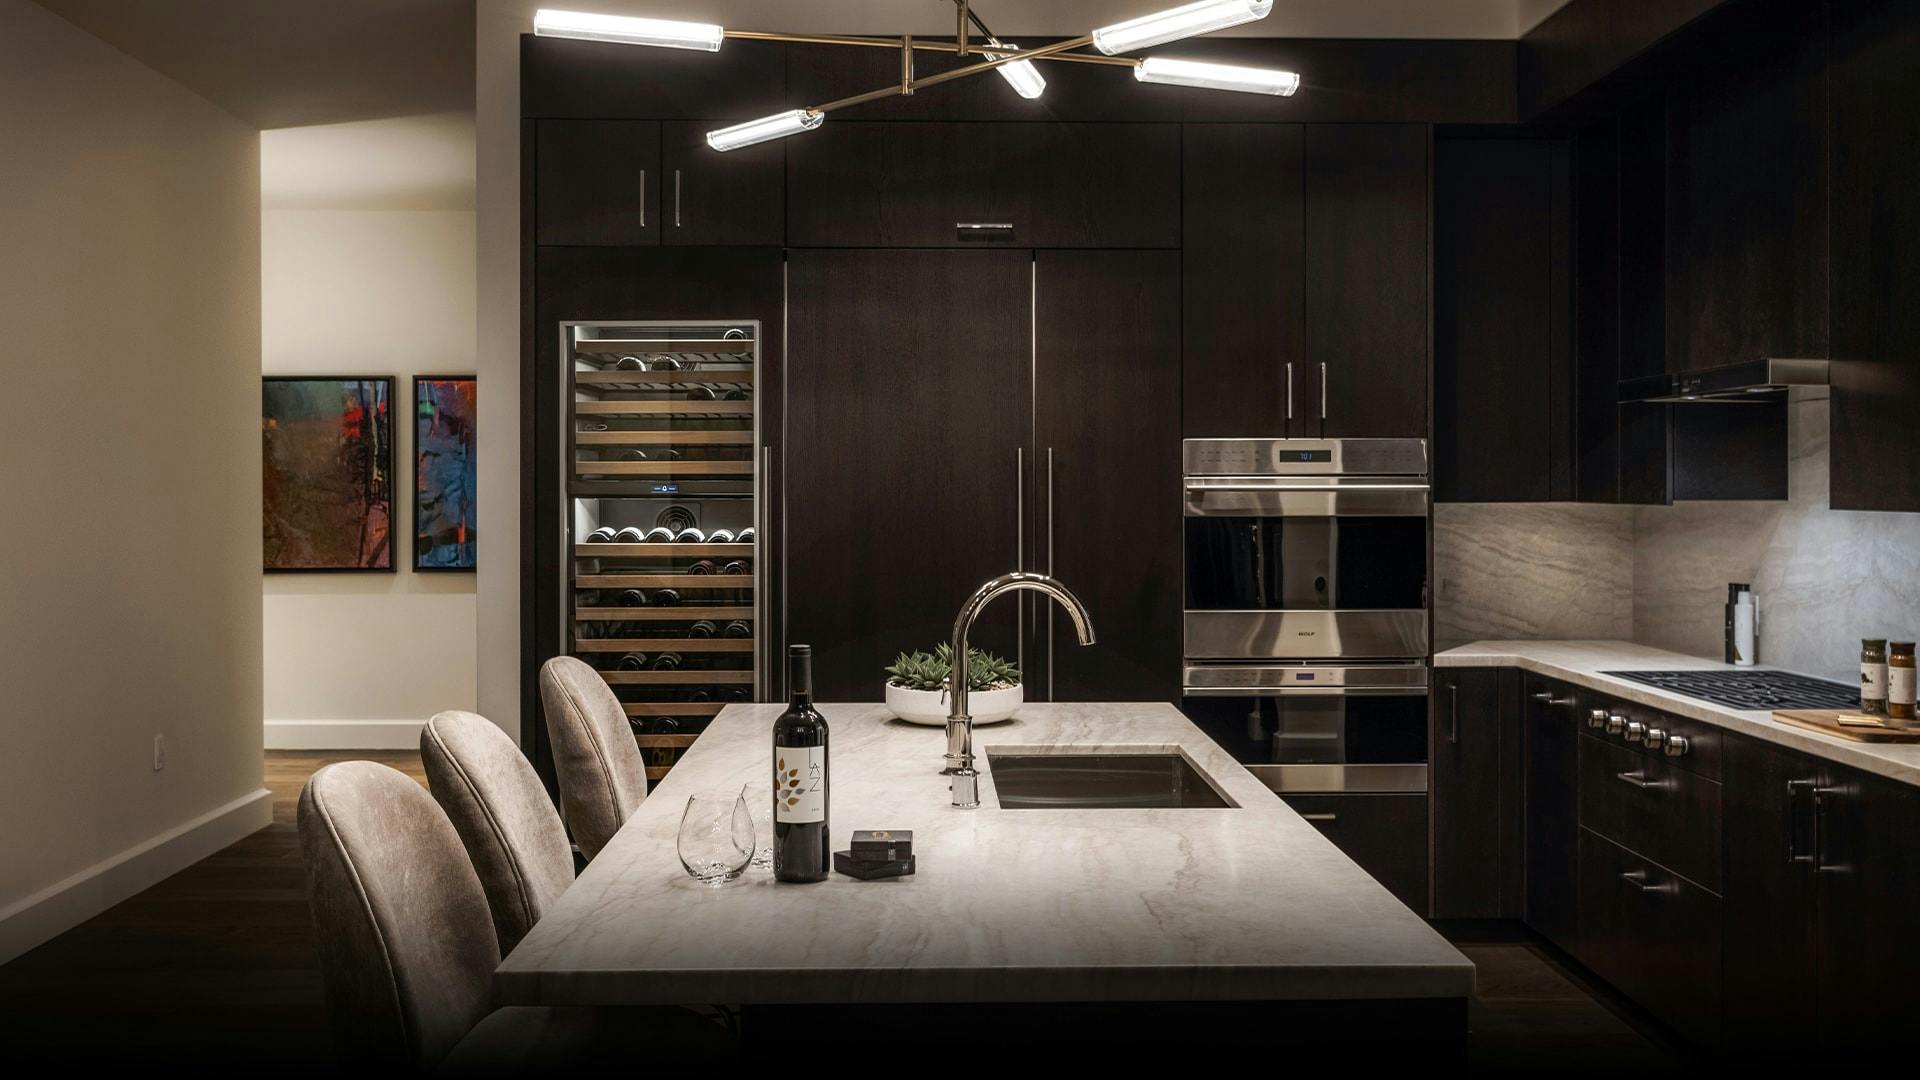 The Aronson residences of the Four Seasons provide a gourmet kitchen experience that is complete with Madreperola quartzite countertops and custom-stained ebony cabinets with white interiors. 